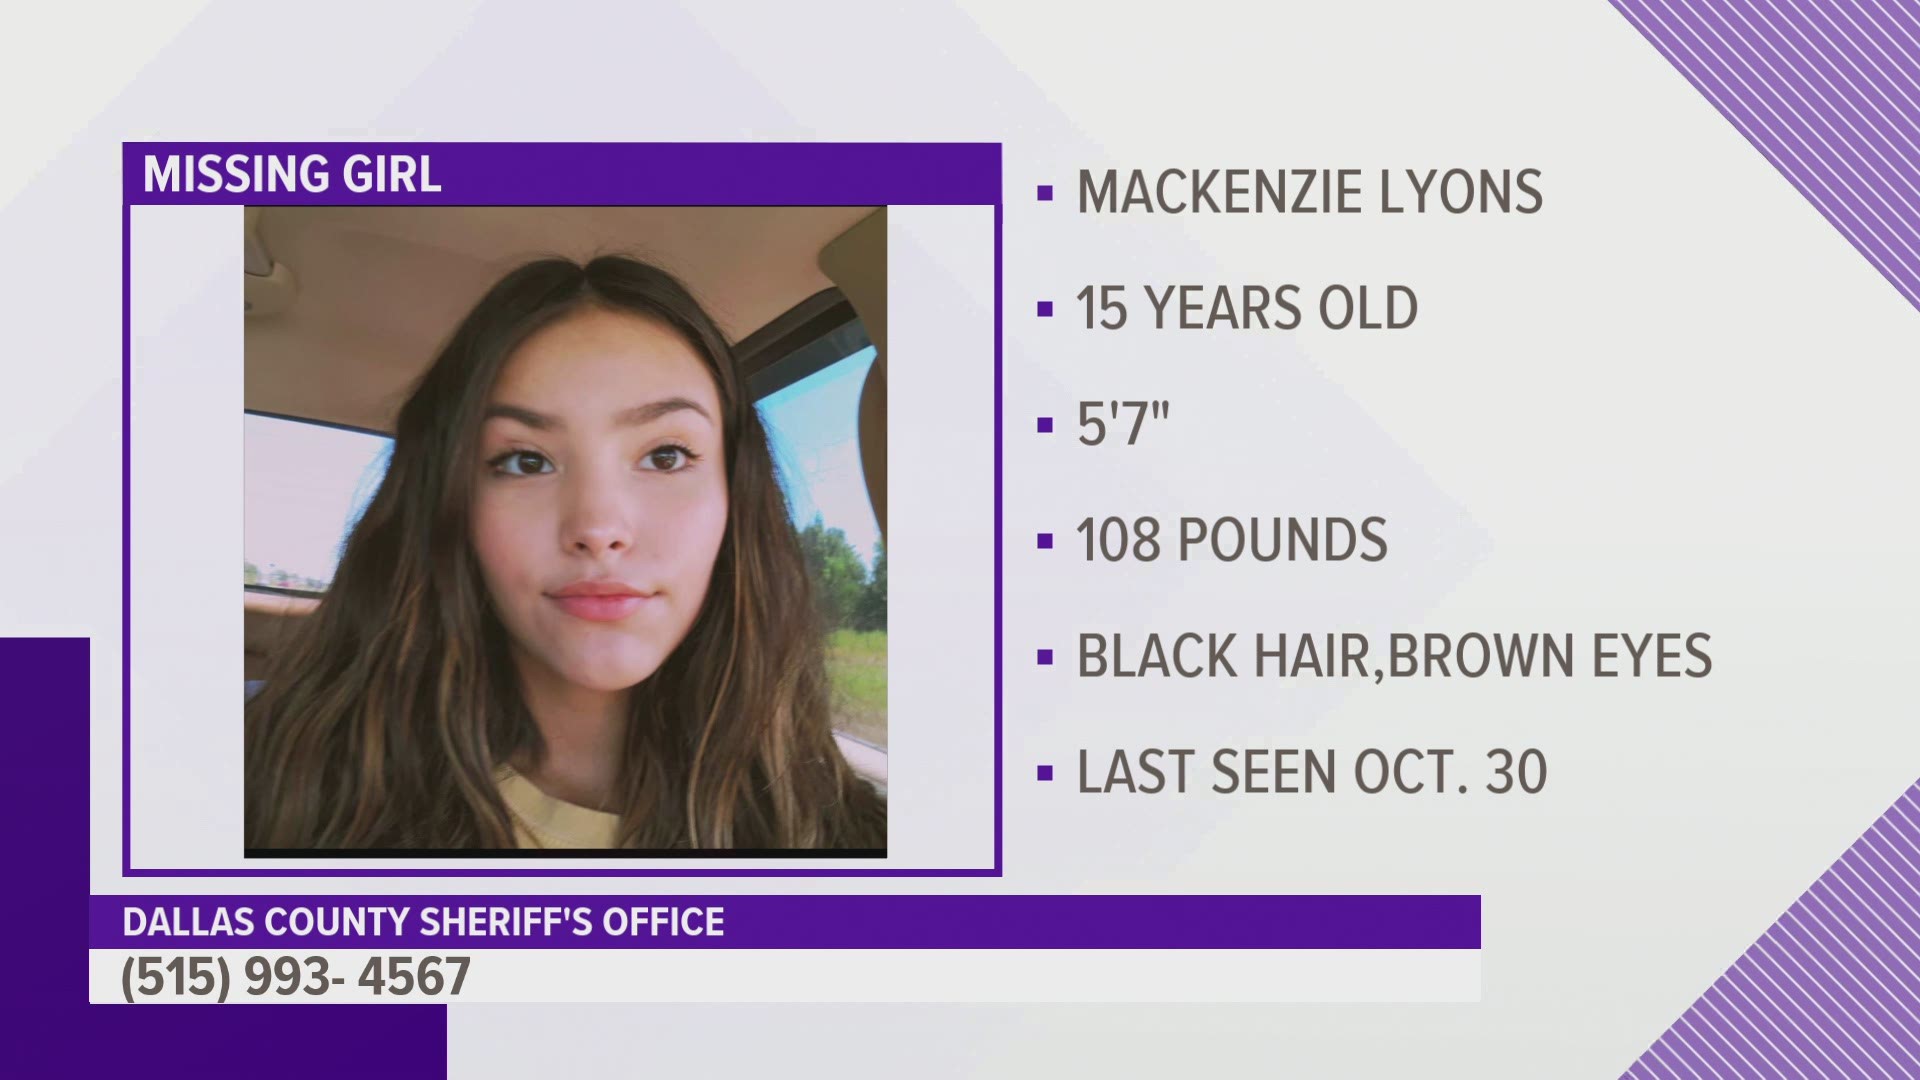 Mackenzie Lyons was last seen getting into a car at a residence southeast of Adel around 2:00 Friday afternoon.